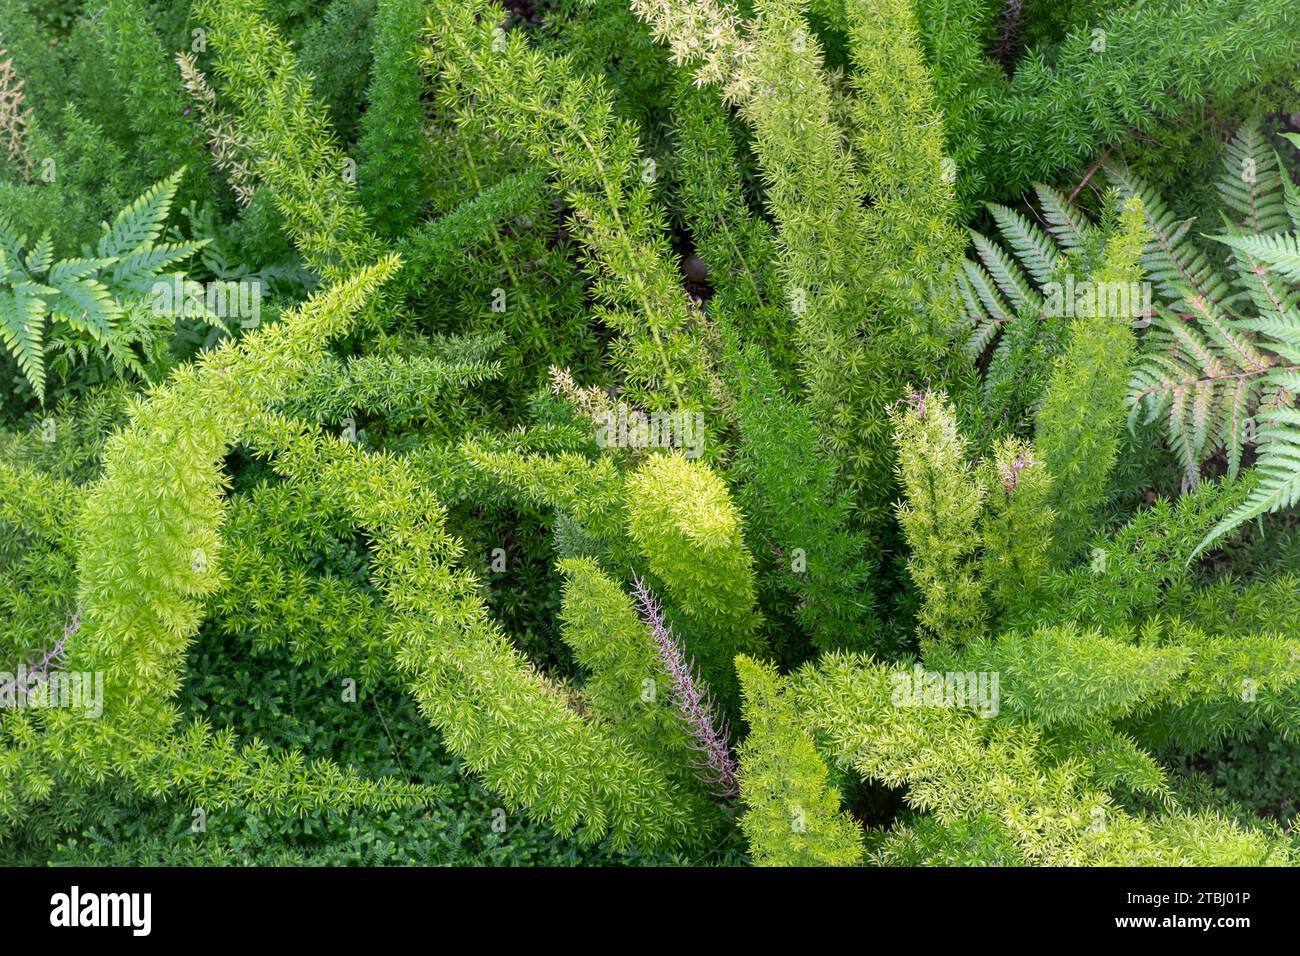 Asparagus densiflorus 'Myersii' (Plume Asparagus) plants viewed from above, an ornamental evergreen perennial with plume-like foliage Stock Photo